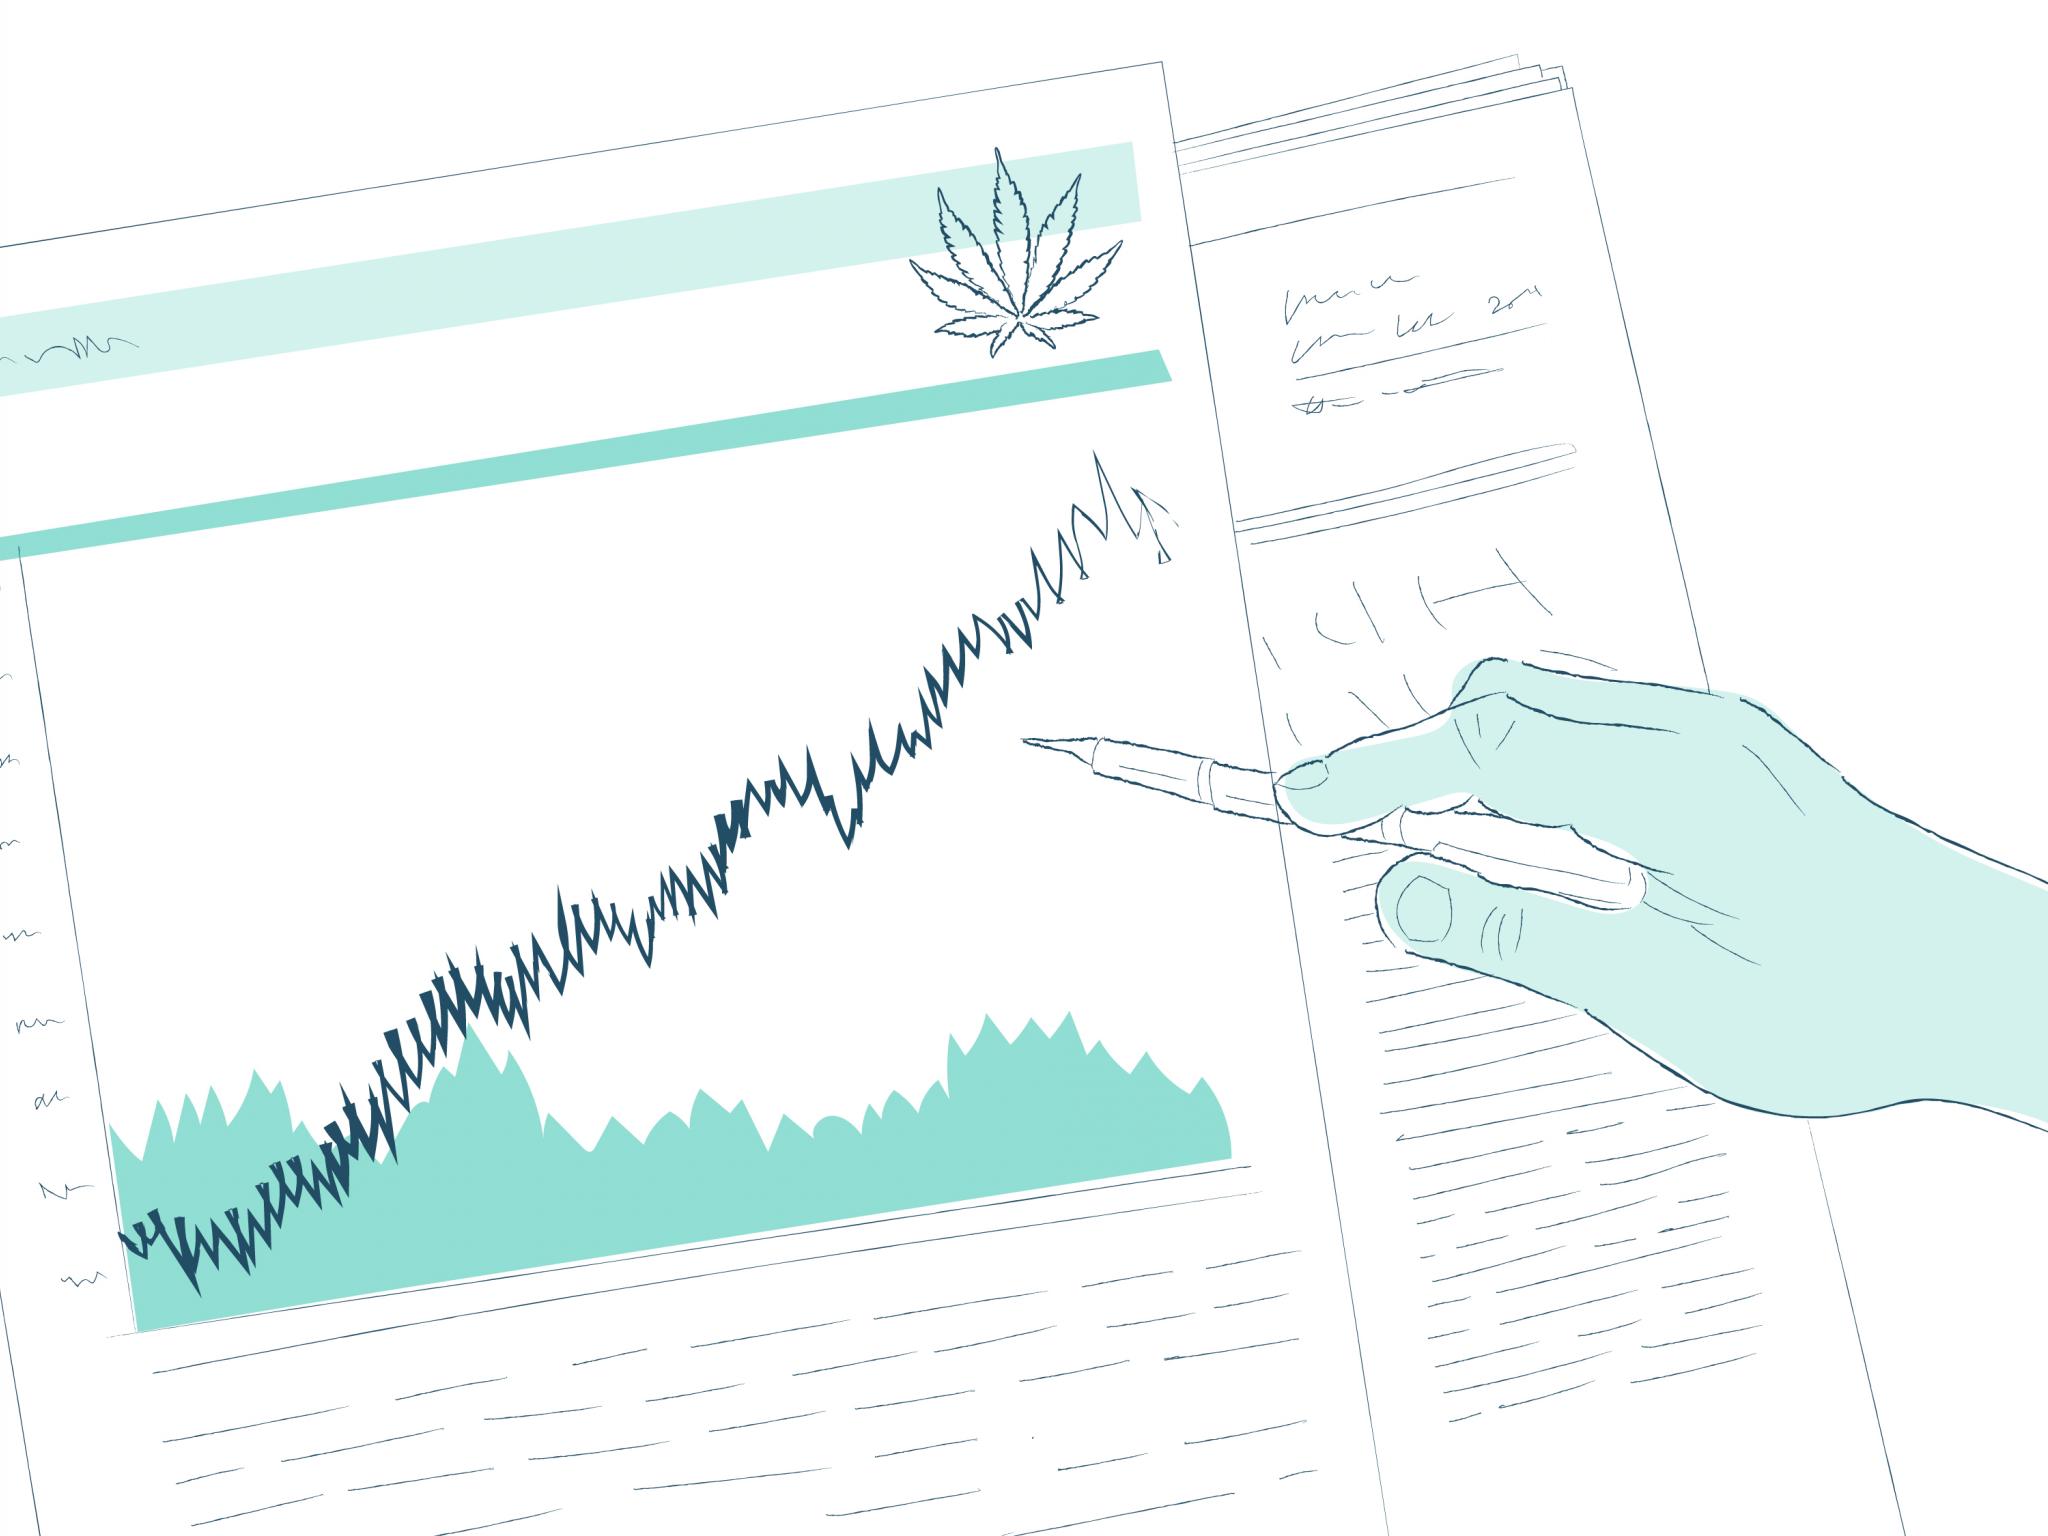  cannabis-stock-gainers-and-losers-from-april-30-2021 